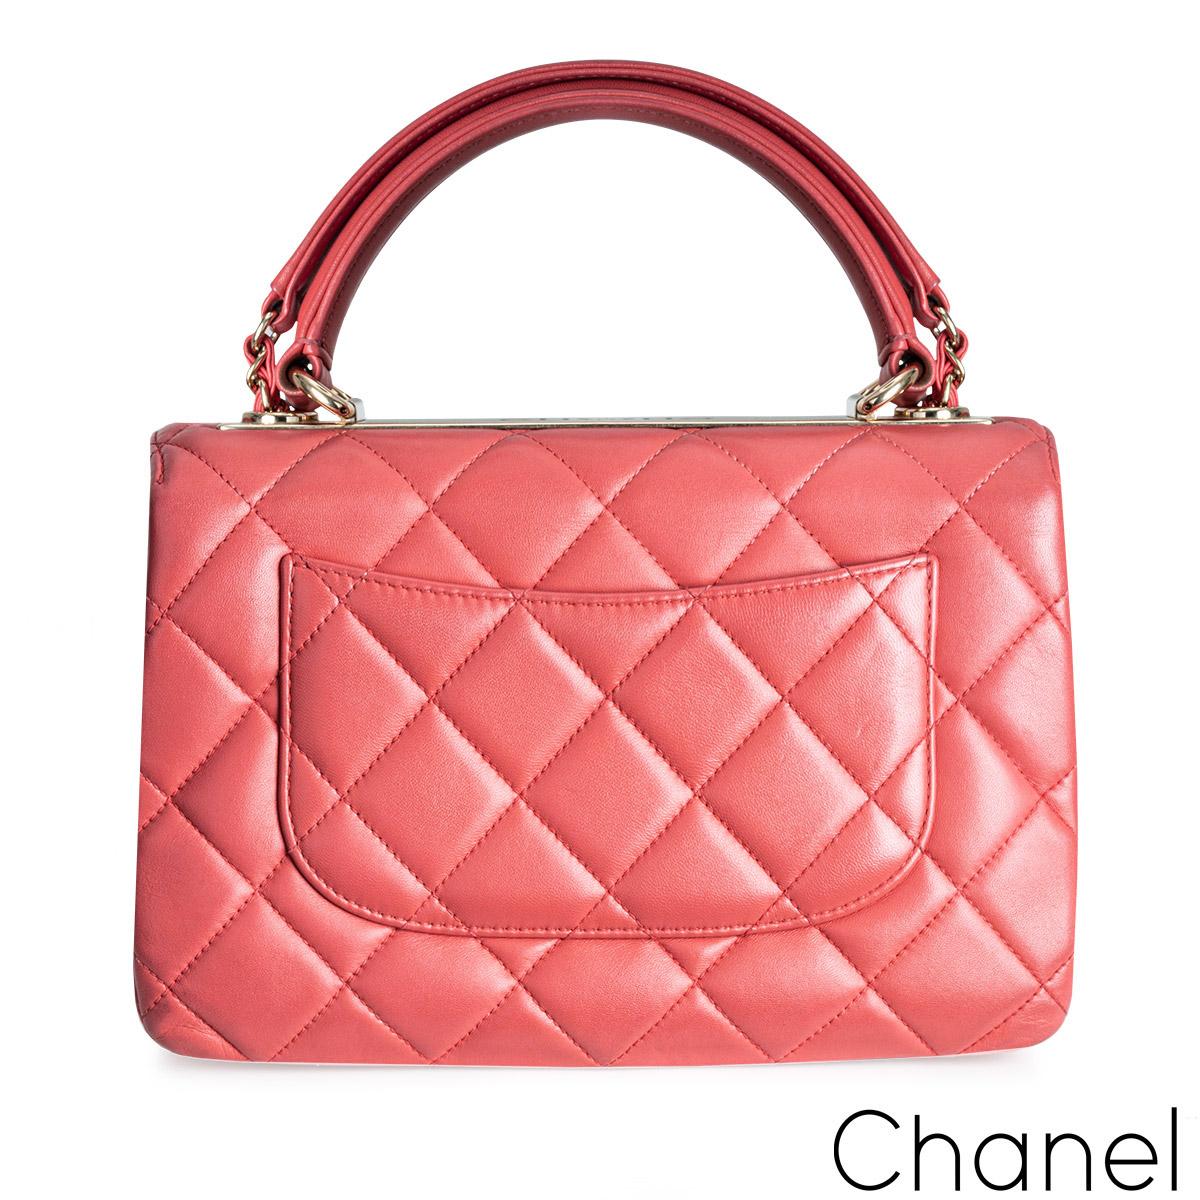 A stylish pink Chanel Small Trendy CC Flap Bag. The exterior of this Trendy is crafted with pink lambskin leather in the signature diamond style stitching and gold tone hardware. It features a front flap with signature CC turnlock closure, half moon